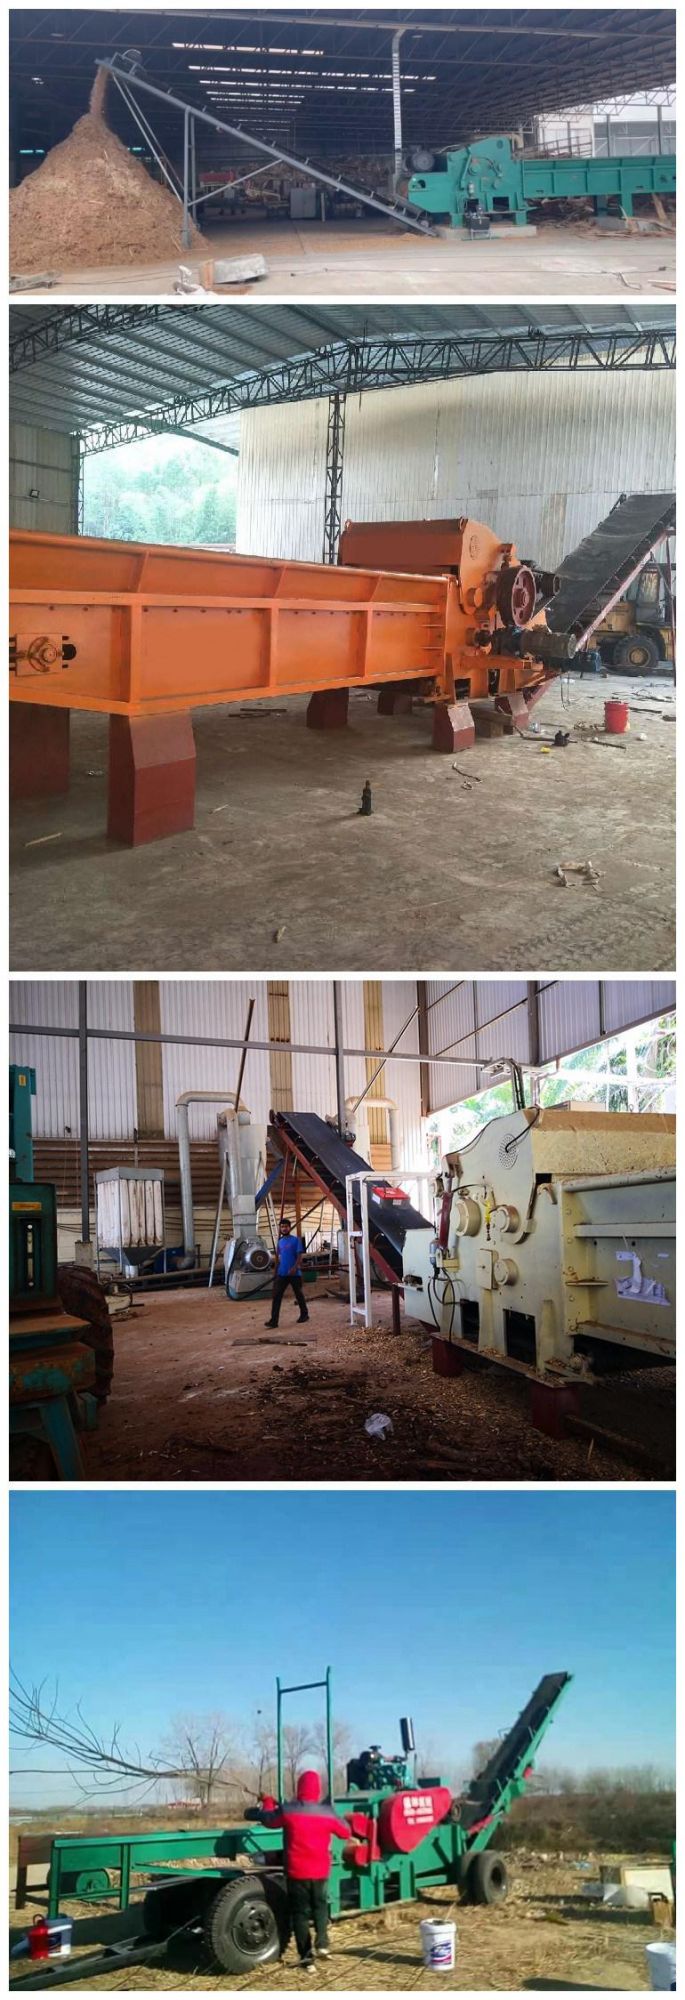 Shd Diesel Type High Quality Low Energy Consumption Low Price Drum Type Wood Crusher